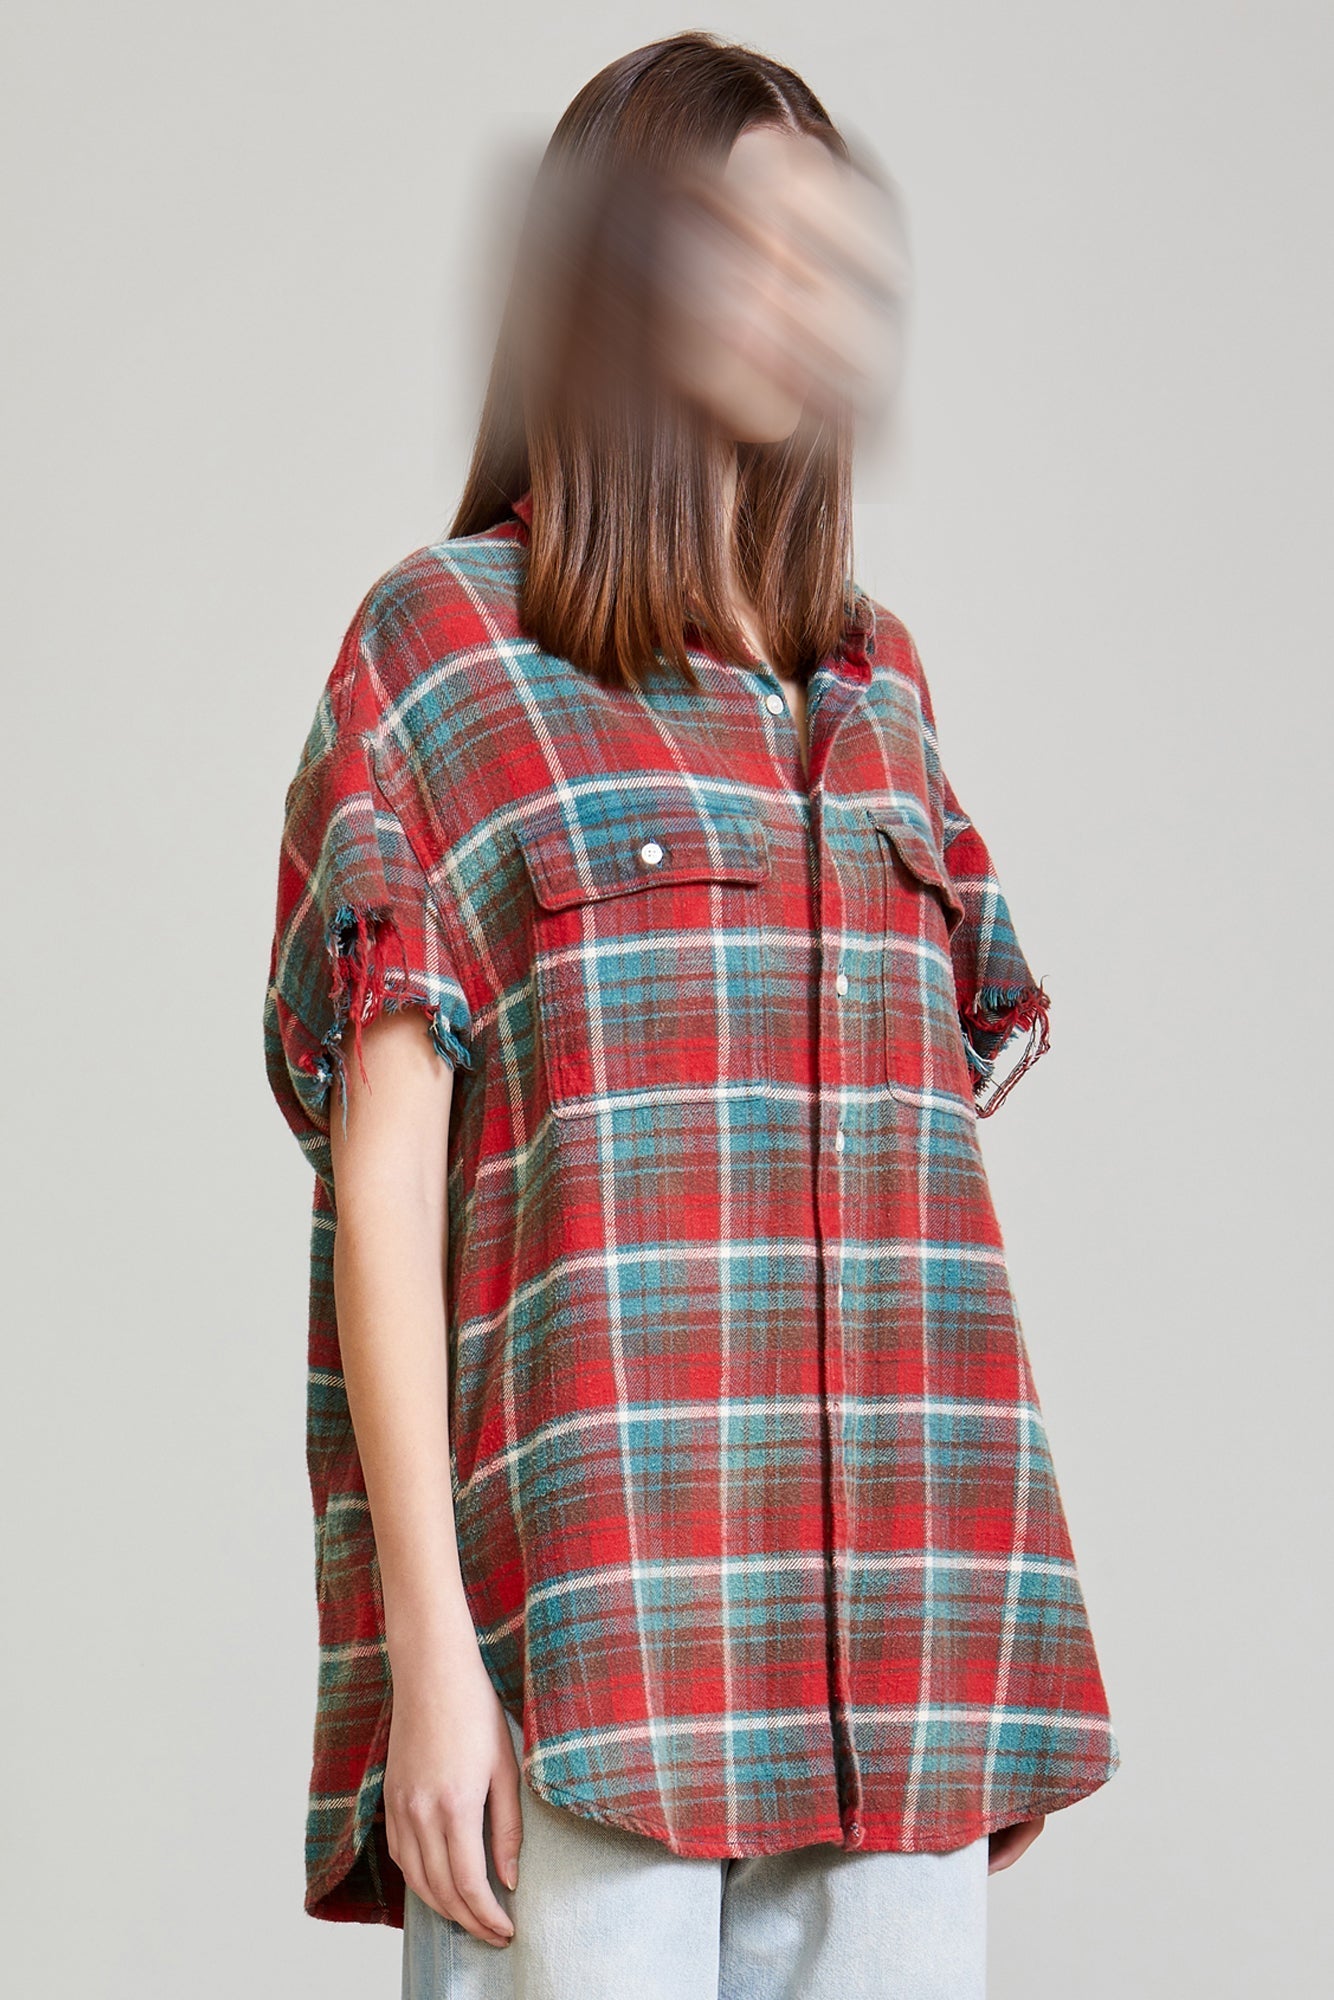 OVERSIZED CUT-OFF SHIRT - BLUE AND RED PLAID